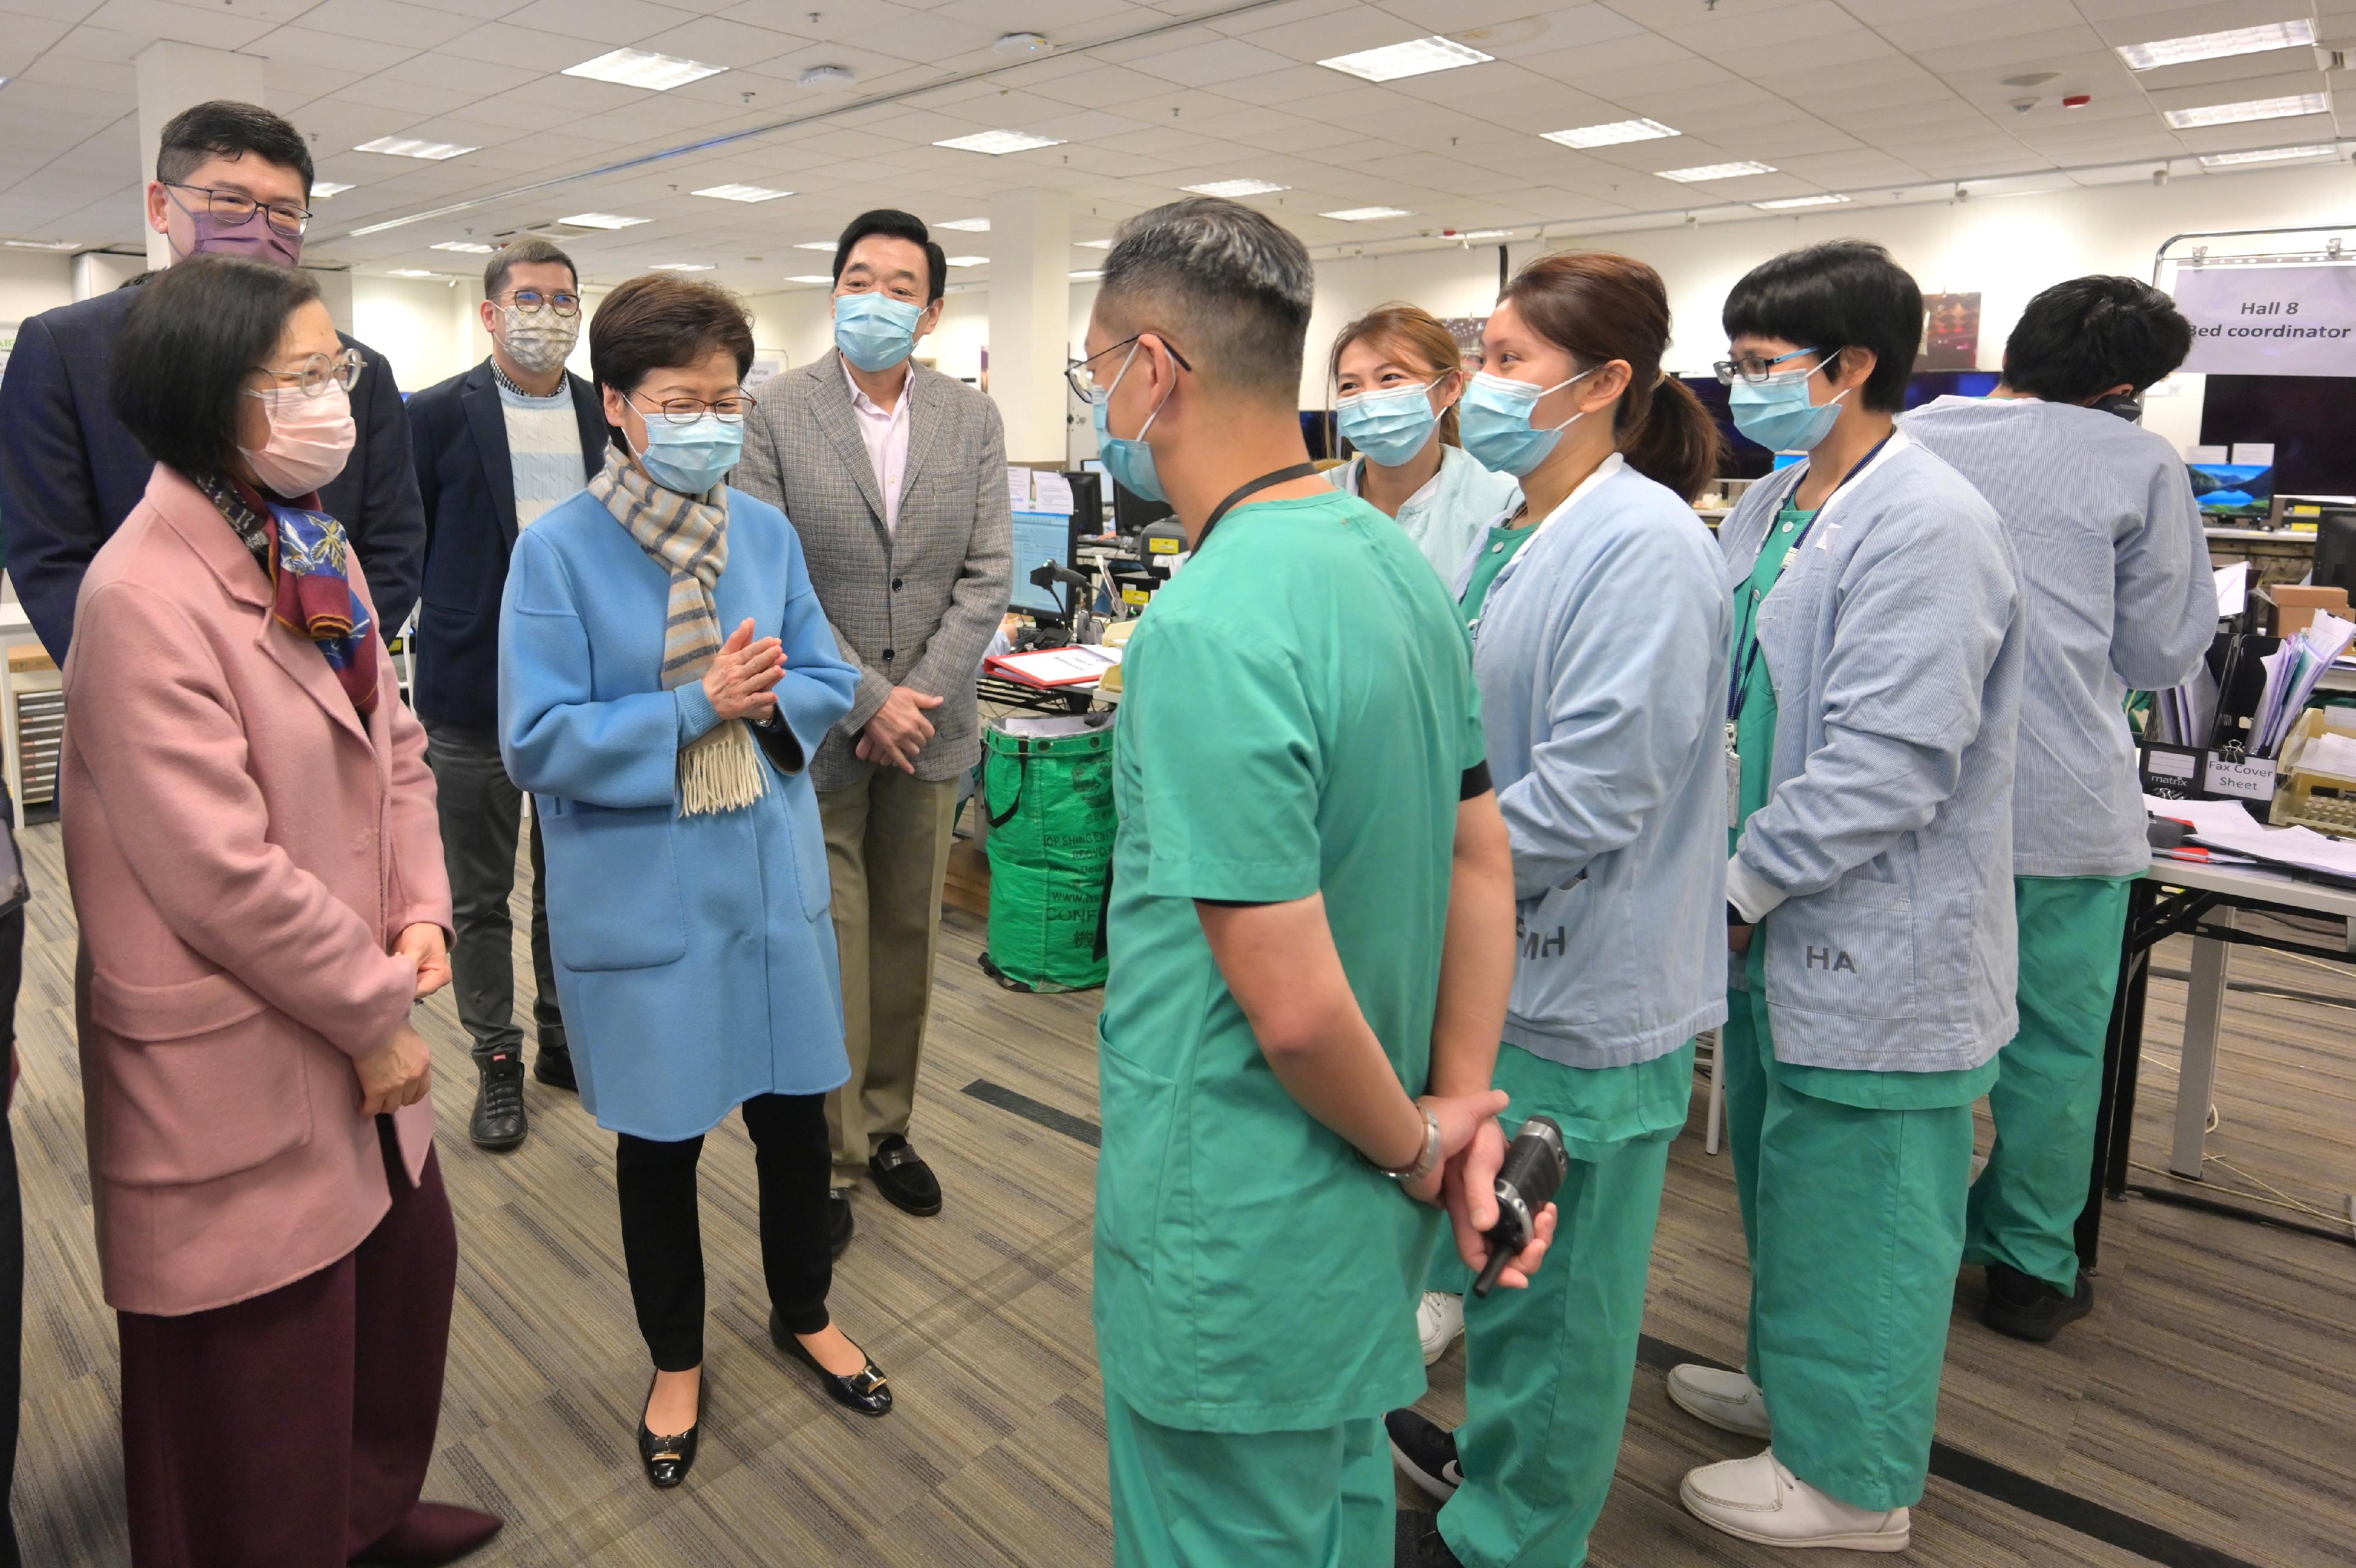 The Chief Executive, Mrs Carrie Lam, visited the community treatment facility at Asia-World Expo today (February 3). Photo shows Mrs Lam (fourth left) chatting with the medical staff. Looking on are the Secretary for Food and Health, Professor Sophia Chan (first left); the Chairman of the Hospital Authority, Mr Henry Fan (fifth left); and the Chief Executive of the Hospital Authority, Dr Tony Ko (second left).